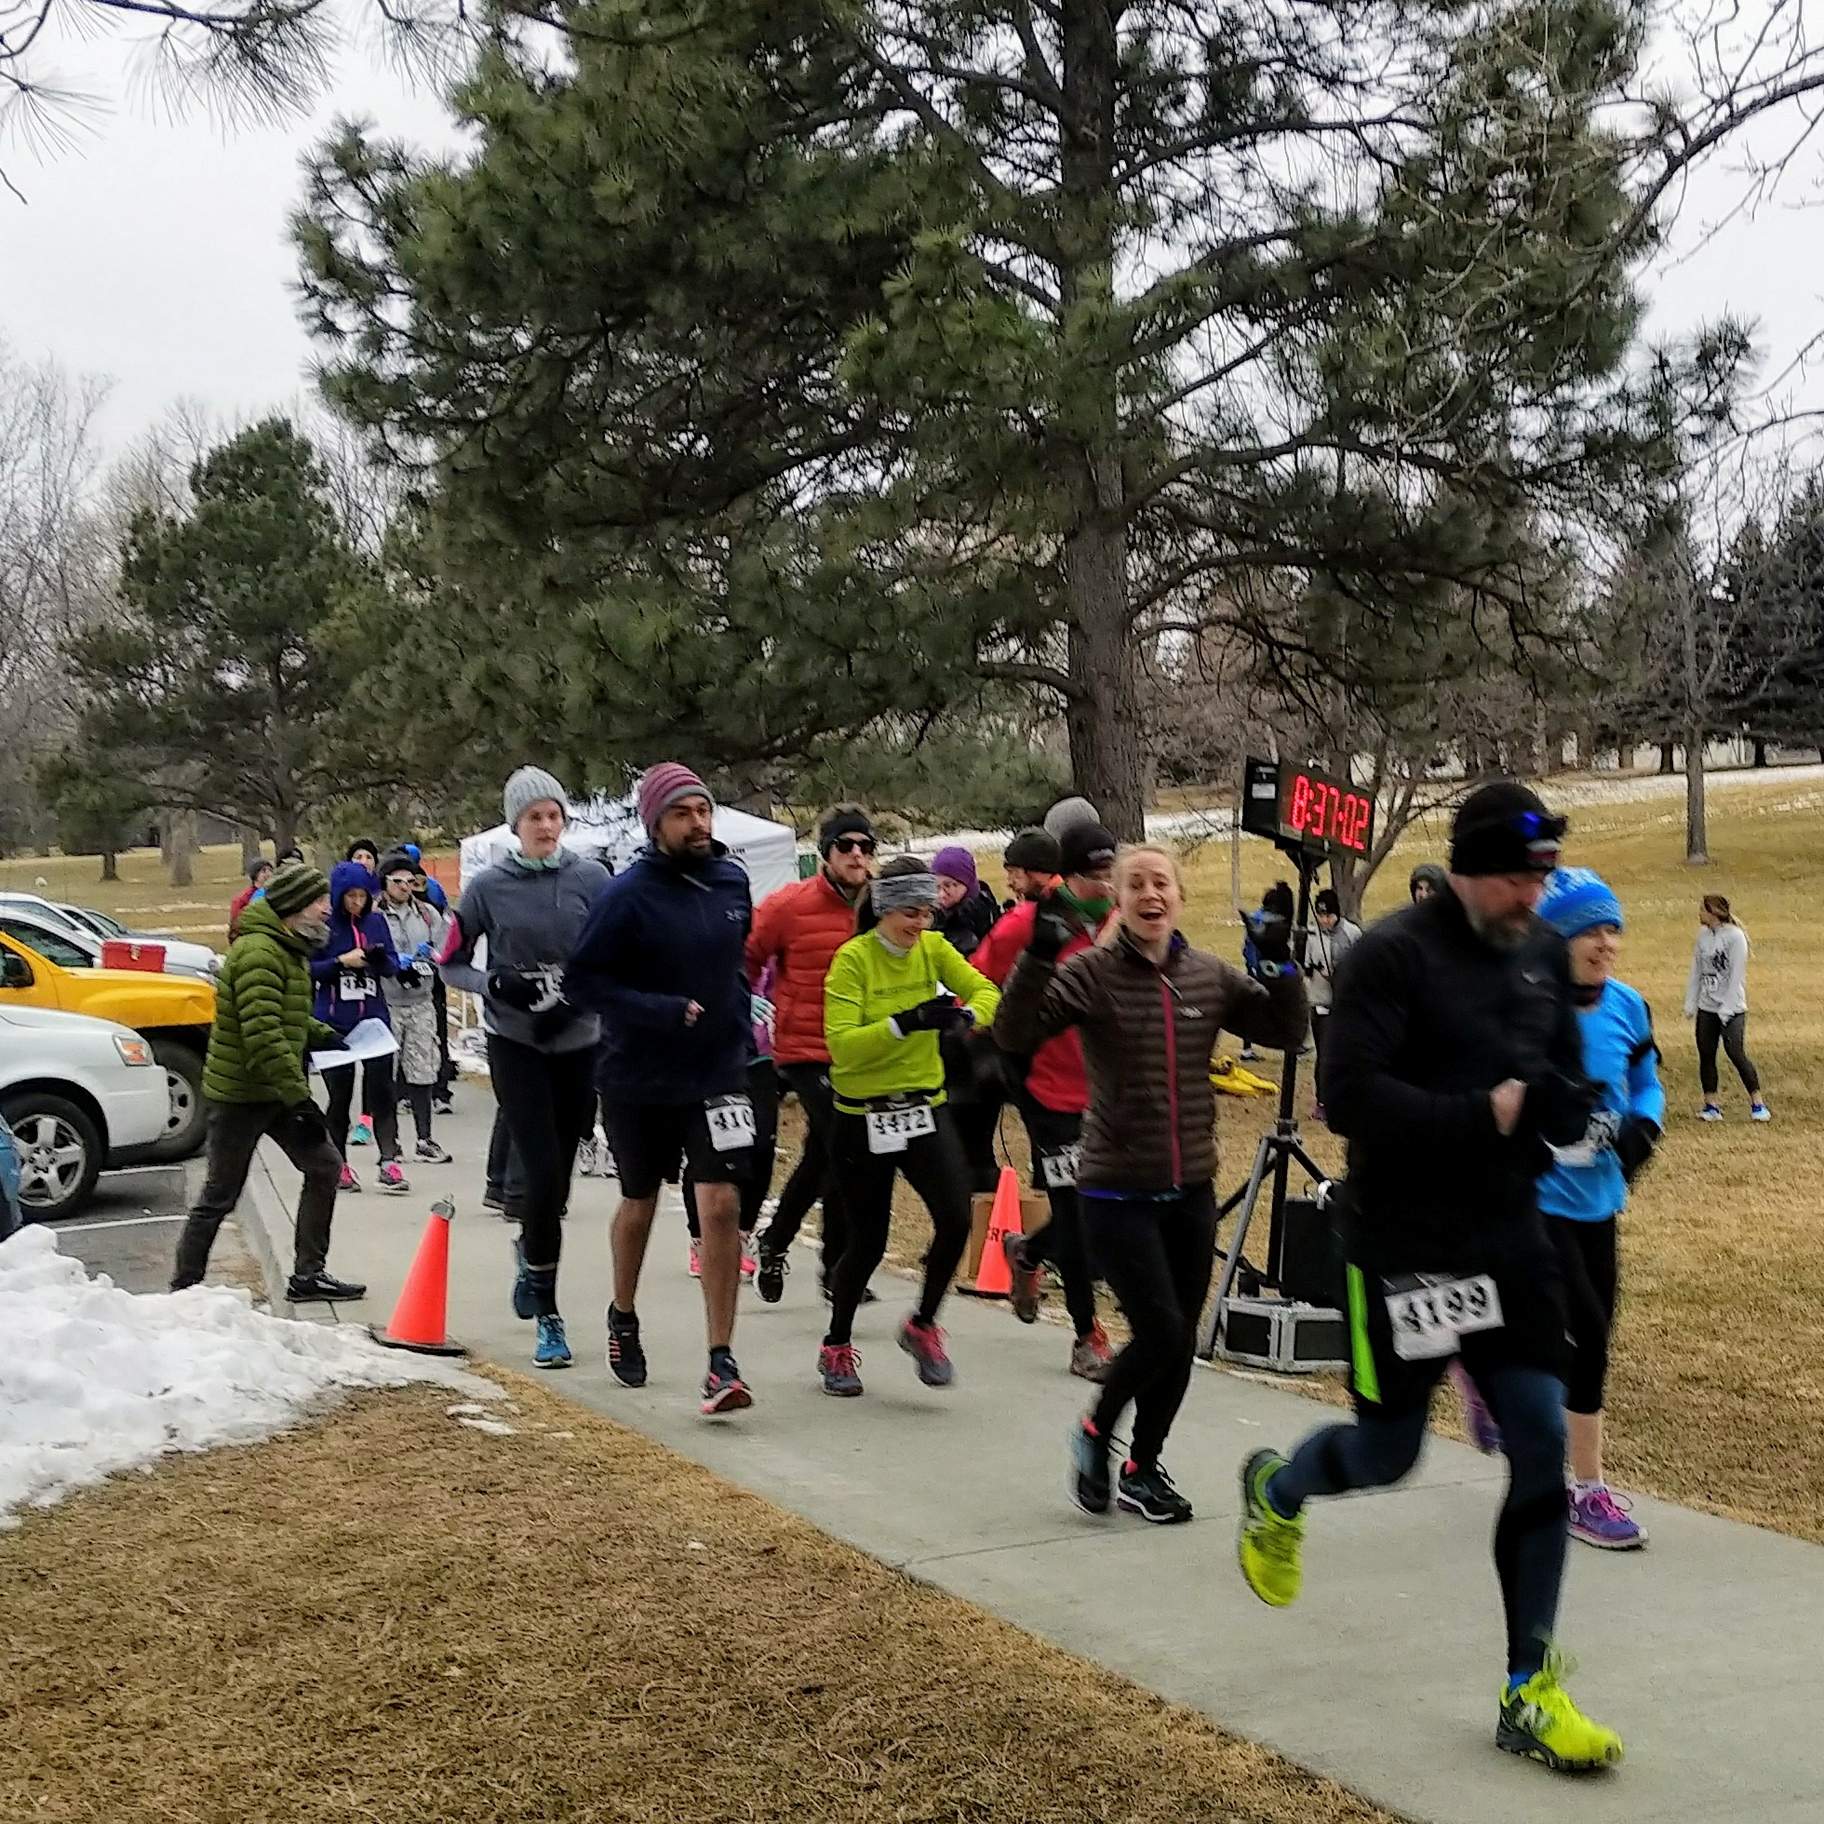 Runners starting their wave at the 2018 Edora Park 8-kilometer Tortoise & Hare race by the Fort Collins Running Club.